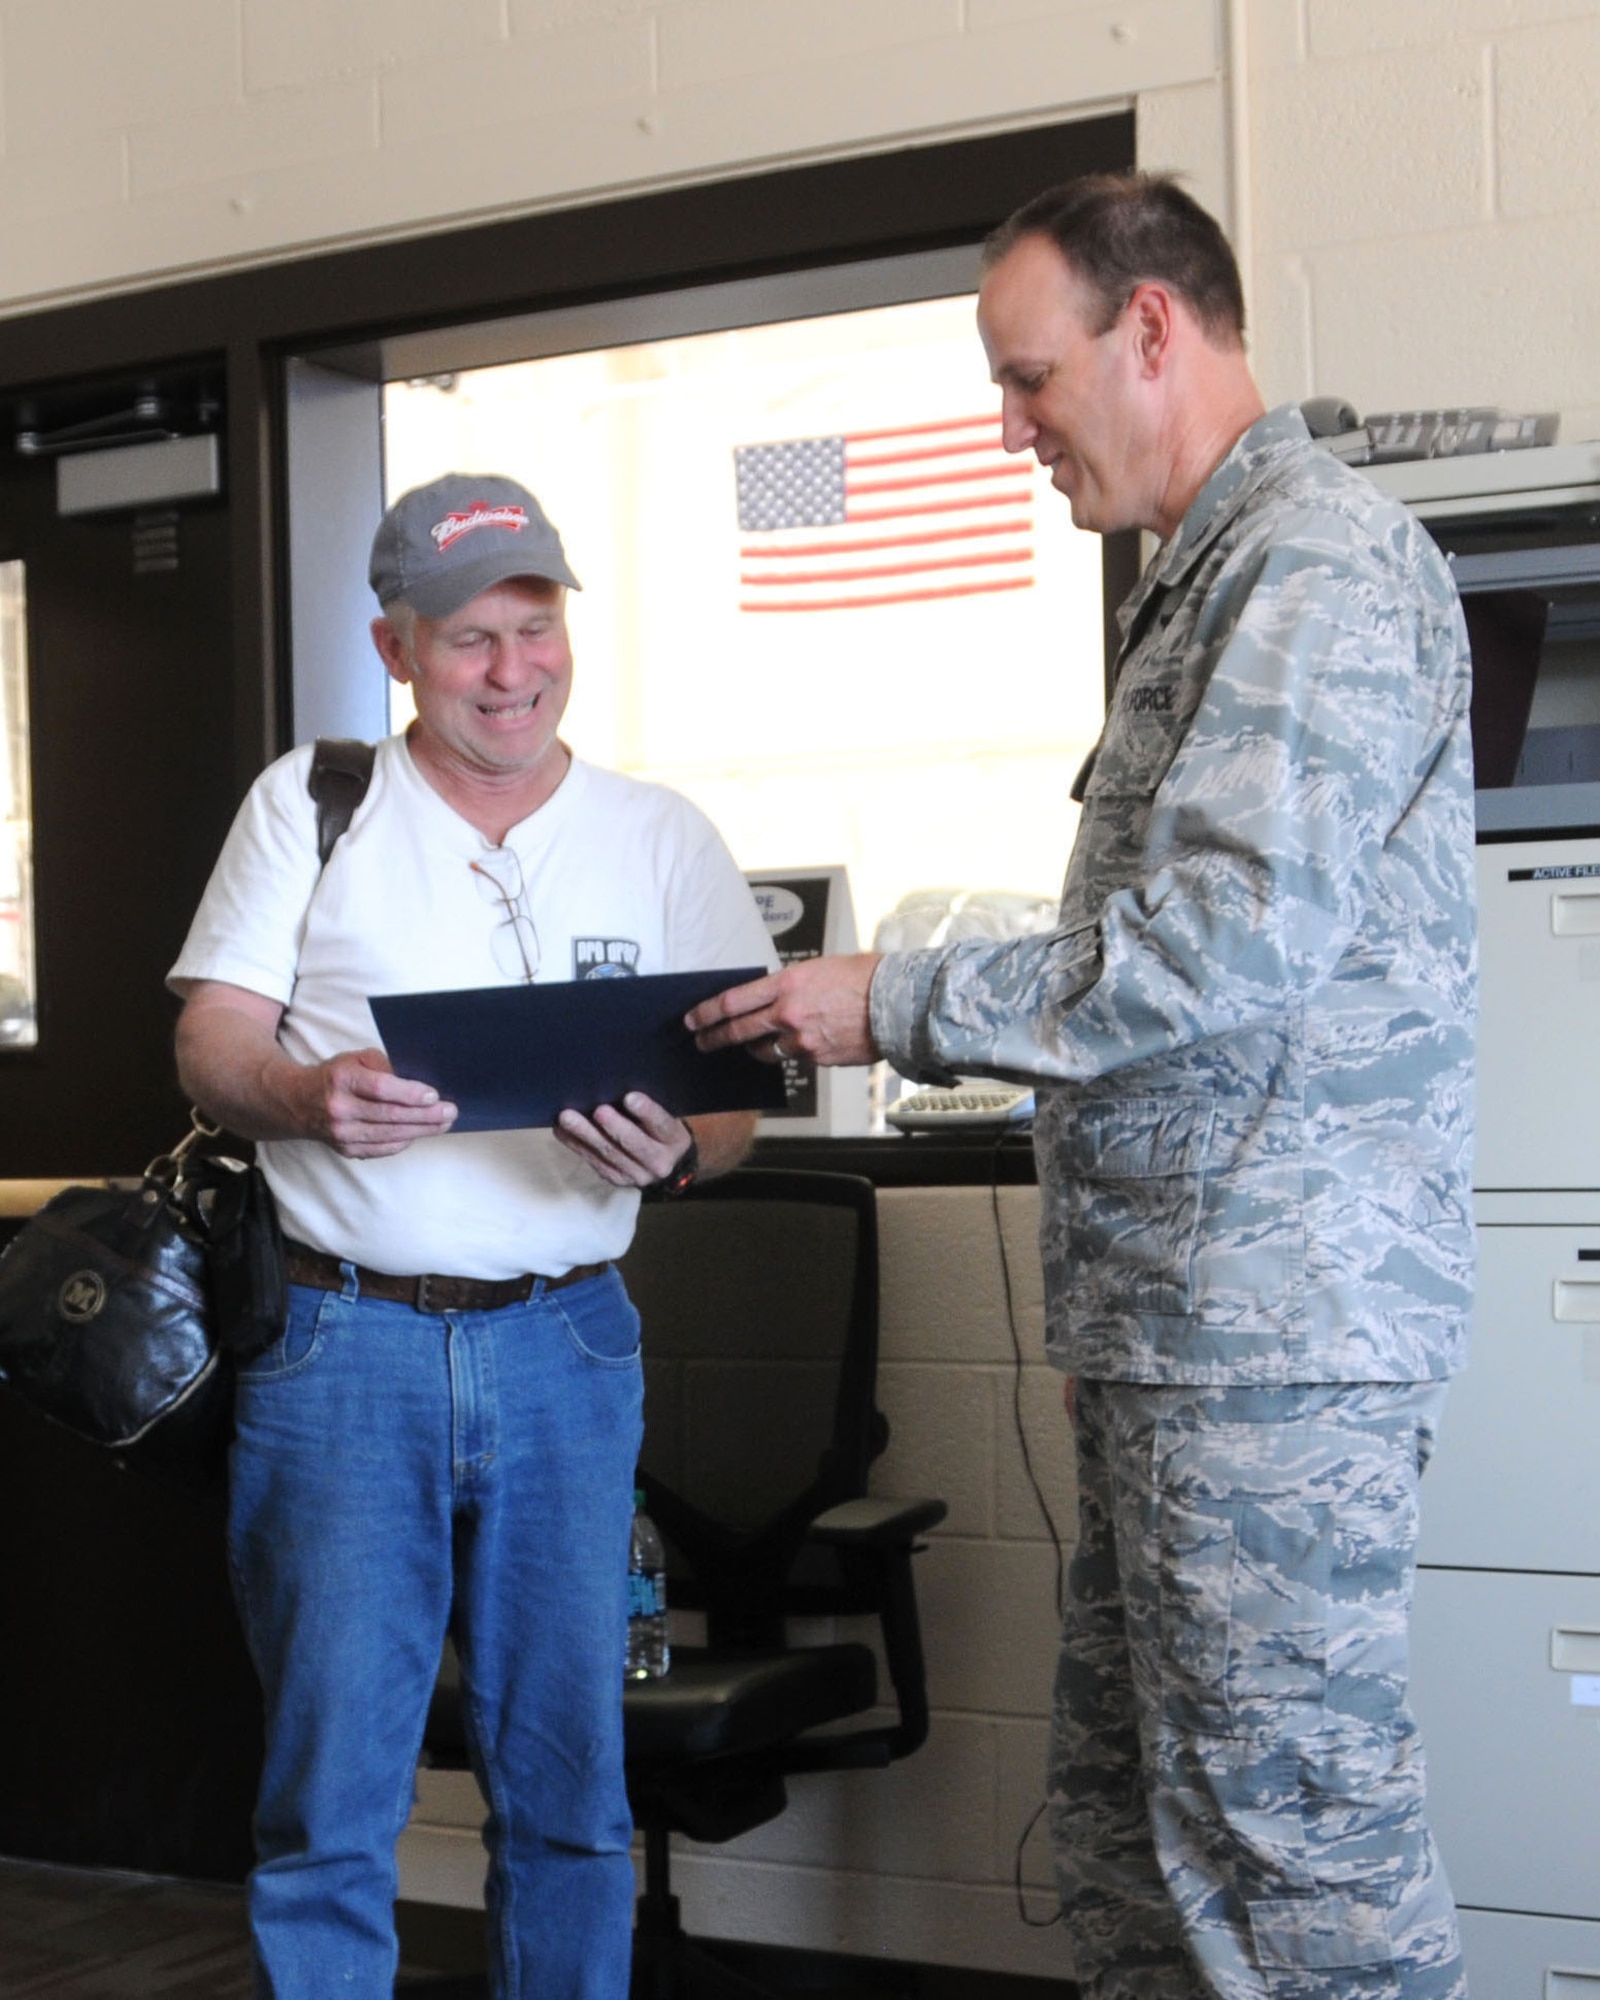 120th Airlift Wing Commander Col. Lee Smith presents a certificate of appreciation to Robert Marquard recognizing him as the unit's first space-a travel passenger.  Marquard is a retiree who served 40 years with the Montana Air National Guard. (U.S. Air National Guard photo/Tech. Sgt. Michael Touchette)